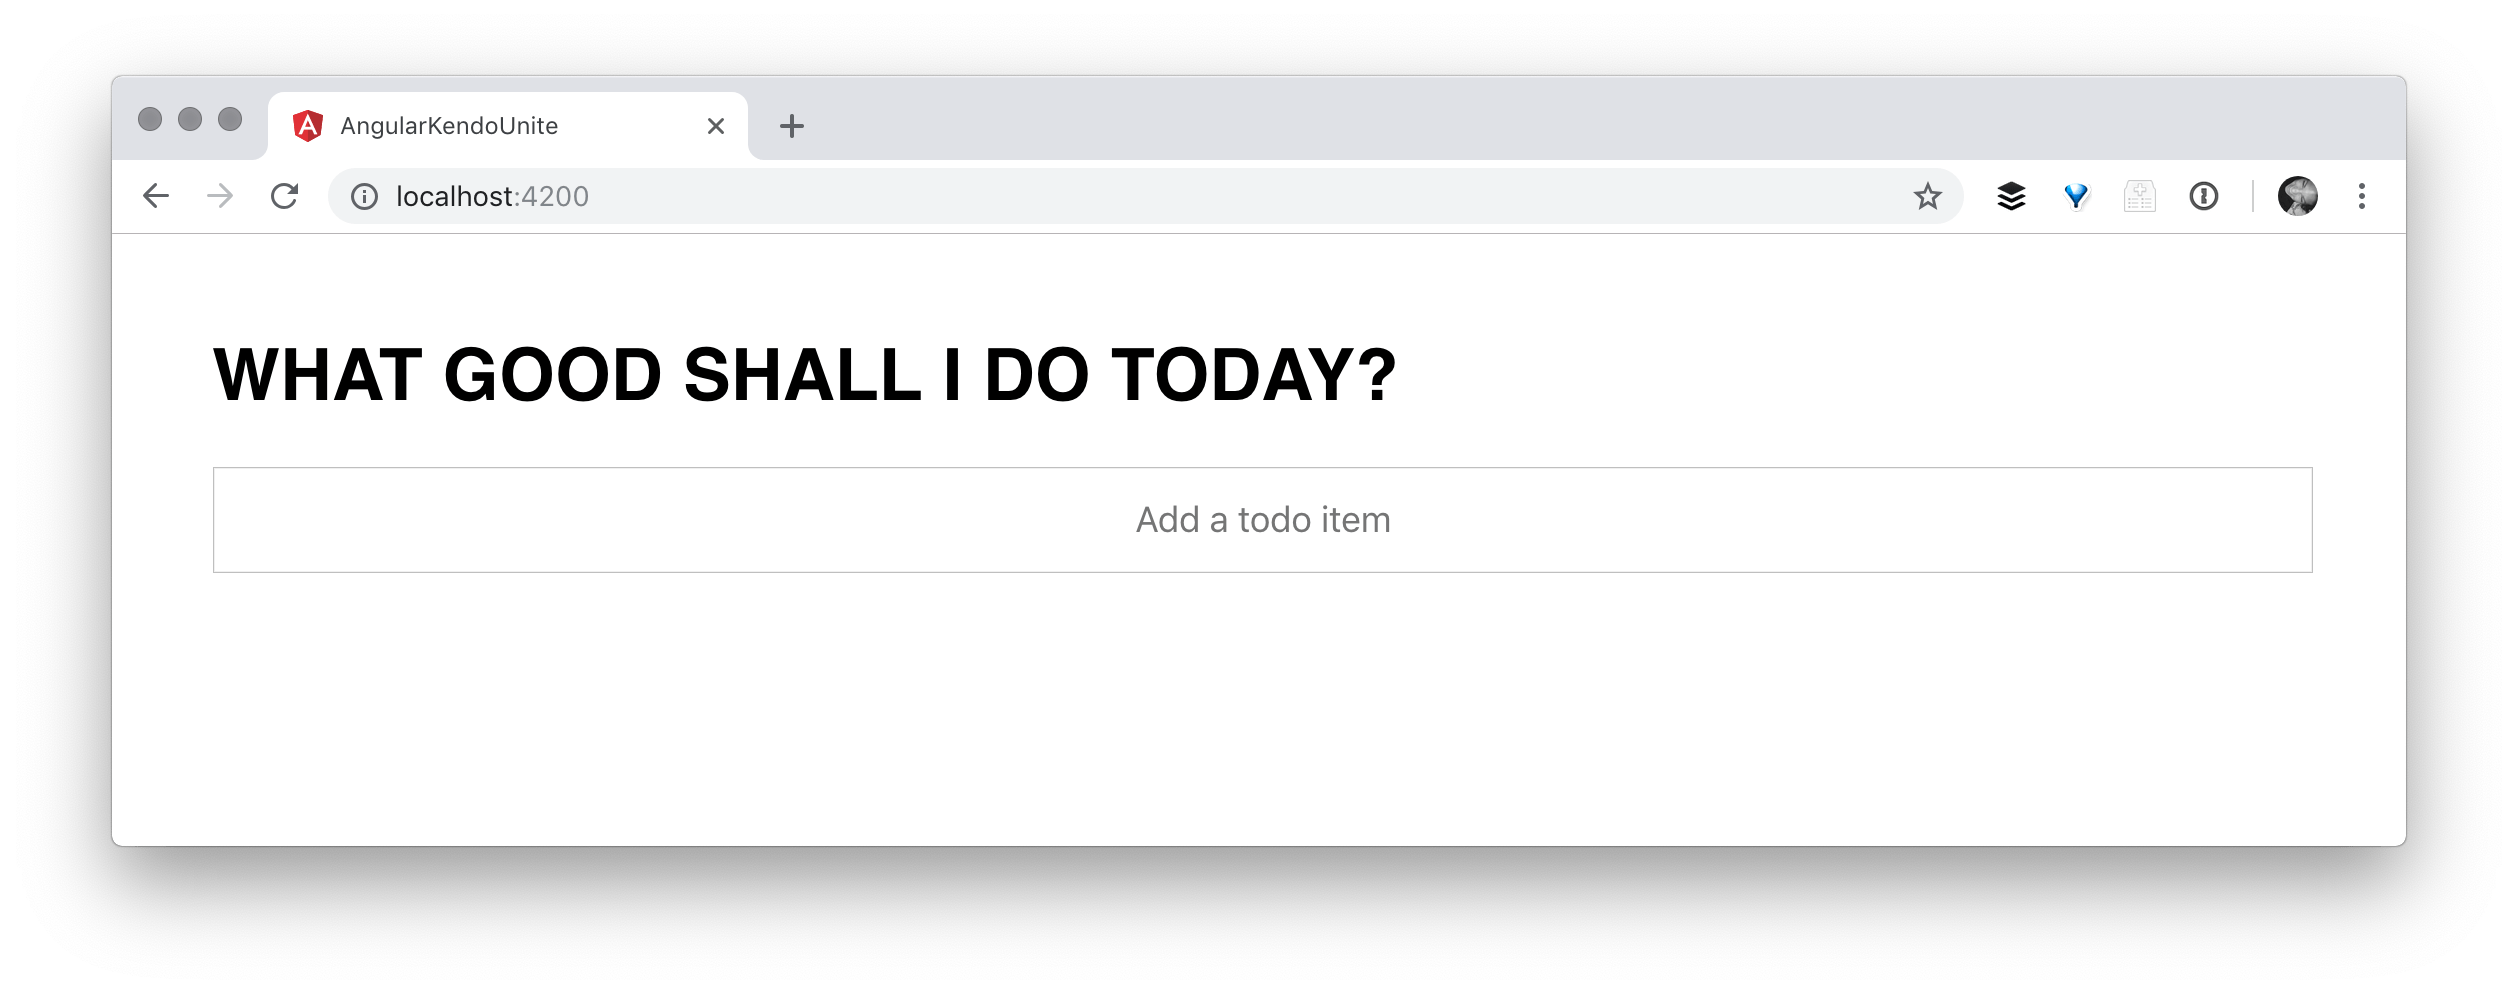 screenshot of app with title and todo input